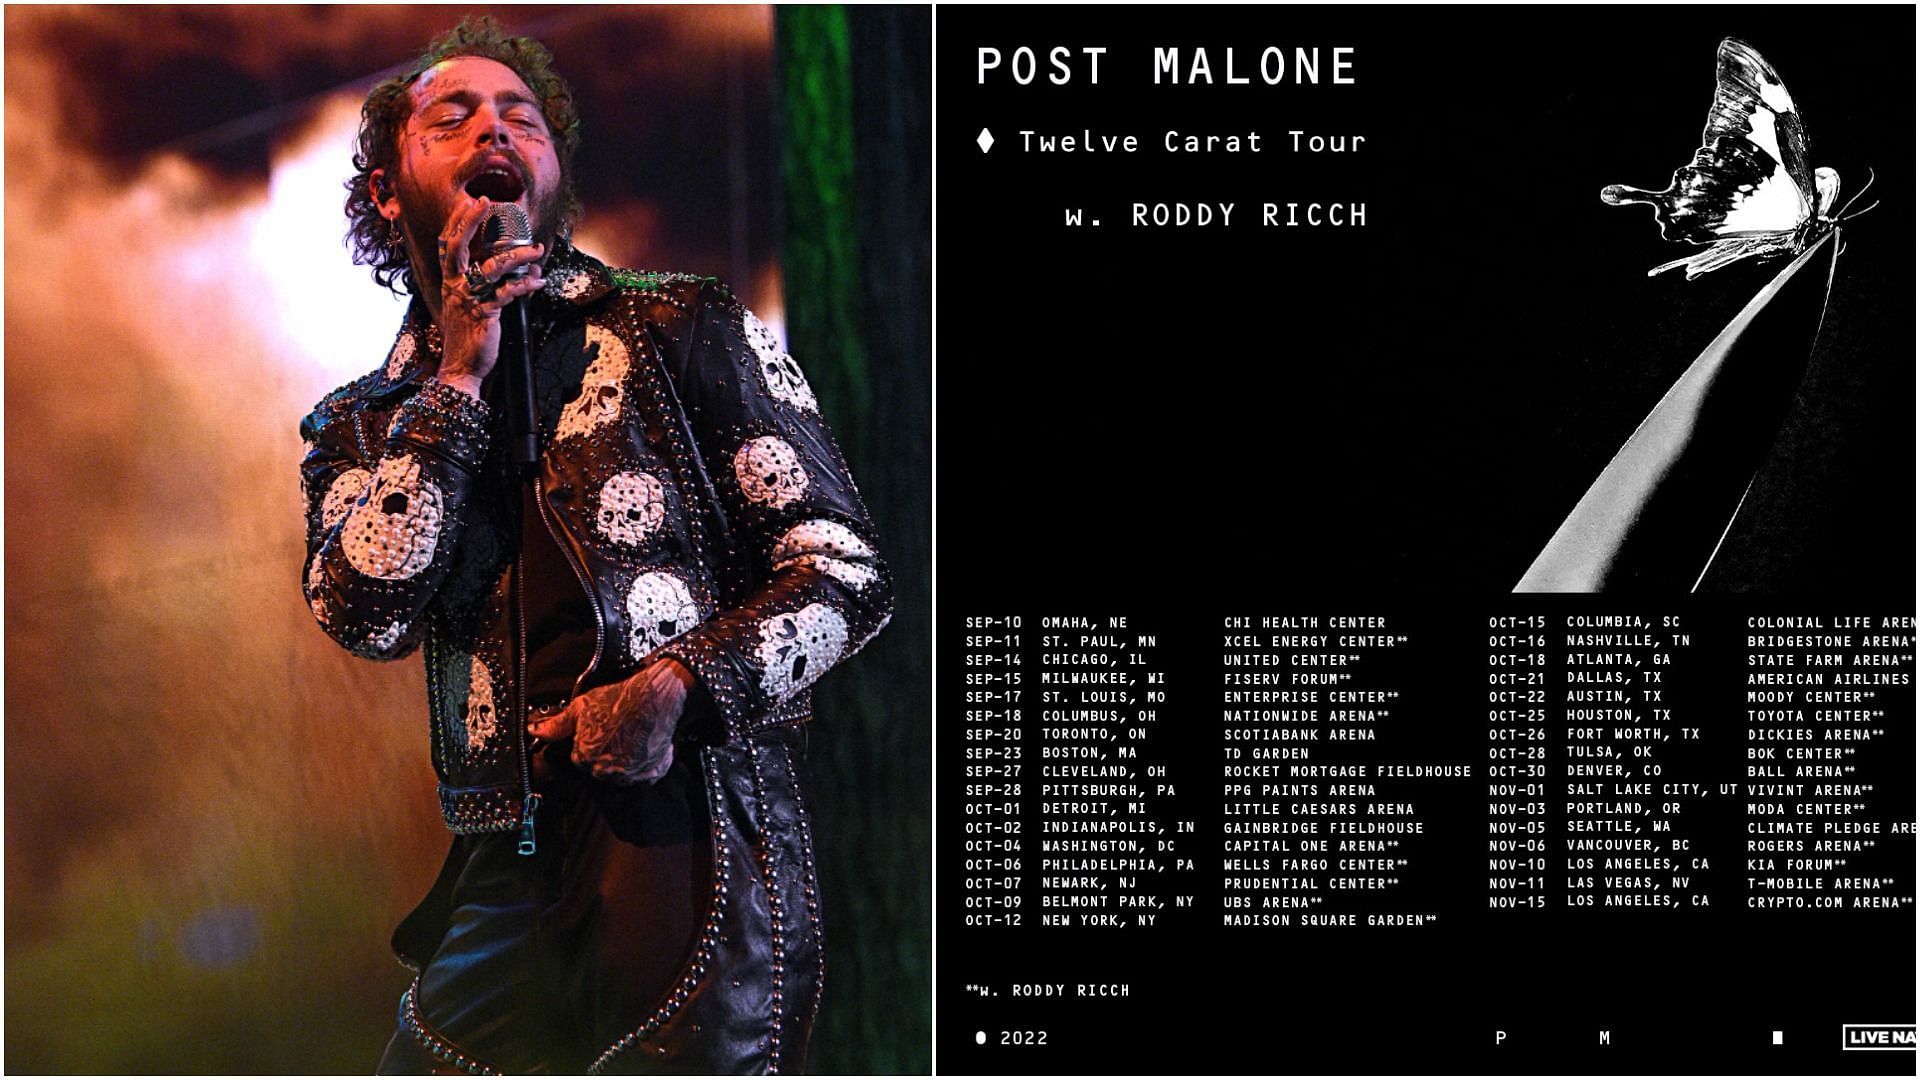 Post Malone Twelve Carat Tour 2022 Tickets, presale, dates and more